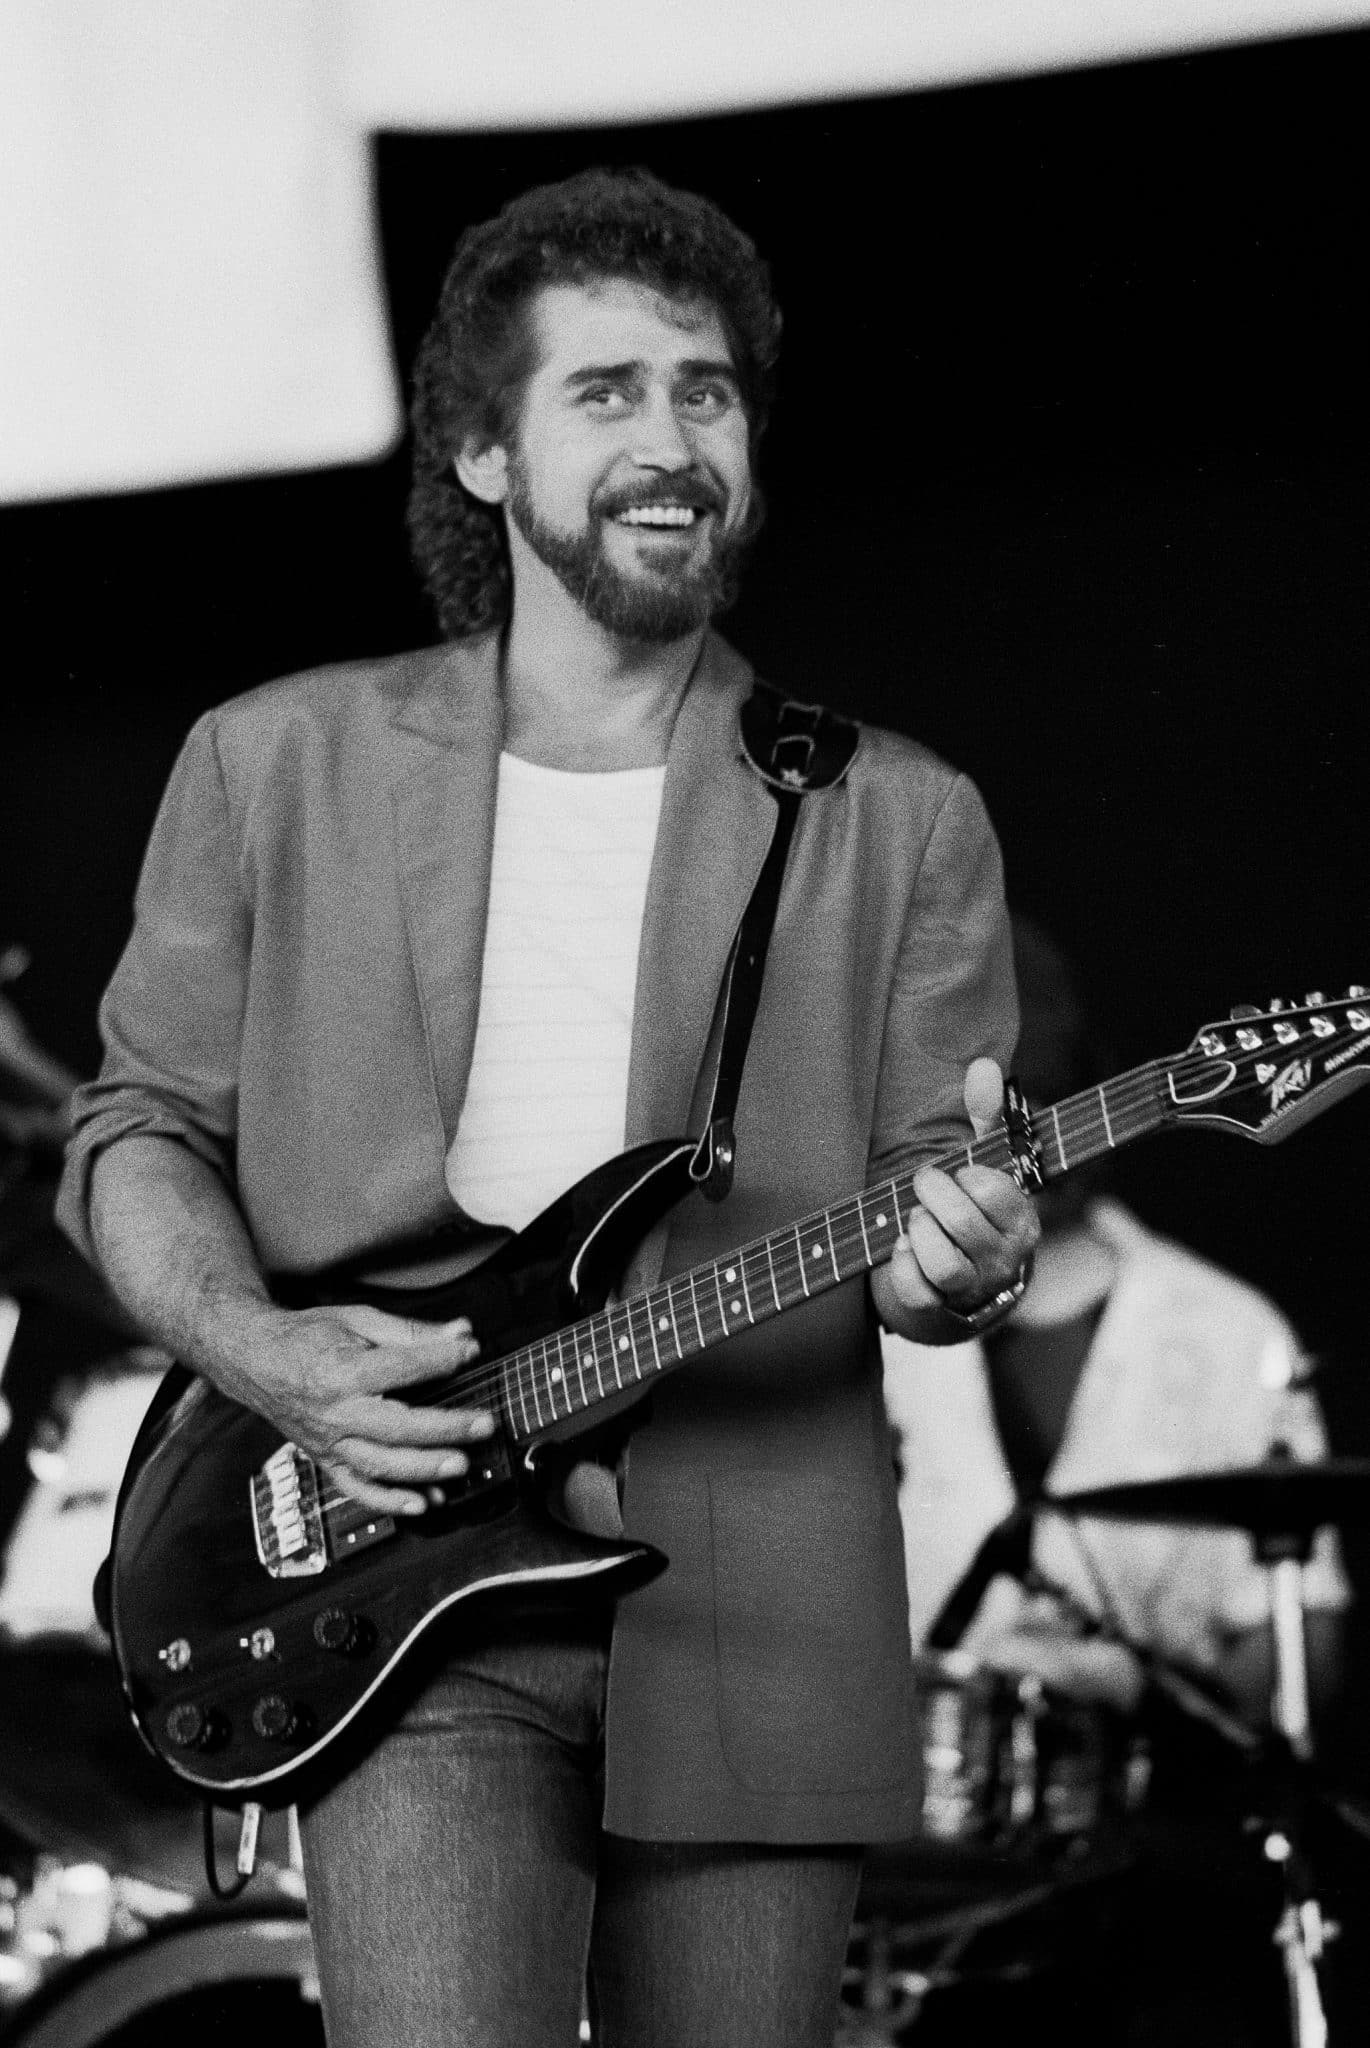 American country music singer Earl Thomas Conley (1941 - 2019) performs at the Poplar Creek Music Theater in Hoffman Estates, Illinois, May 26, 1985 in Hoffman Estates, Illinois 